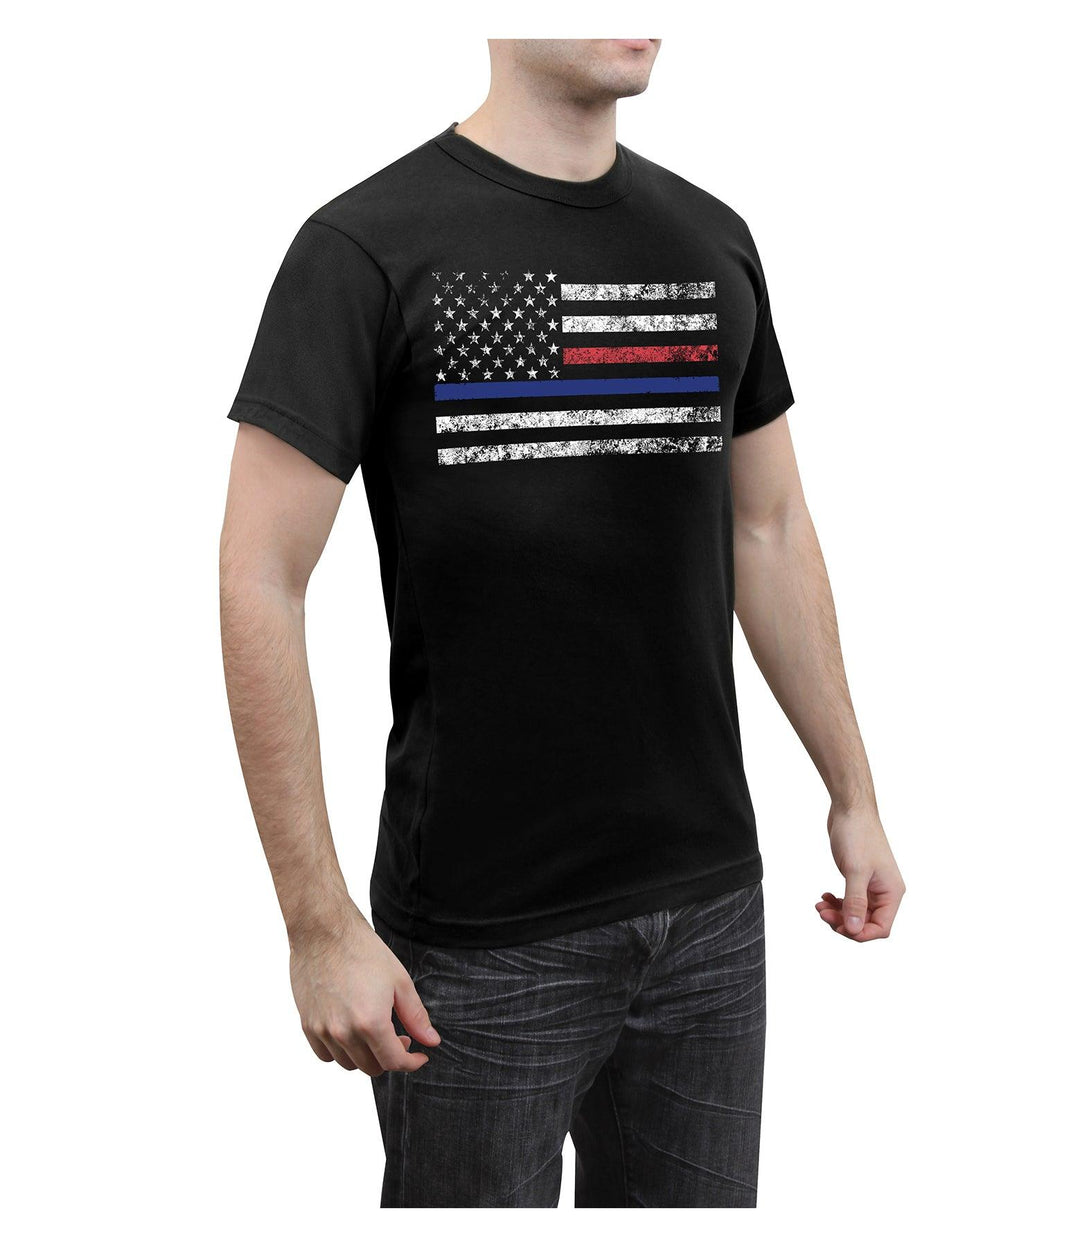 Thin Blue Line & Thin Red Line T-shirt by Rotcho - Legendary USA